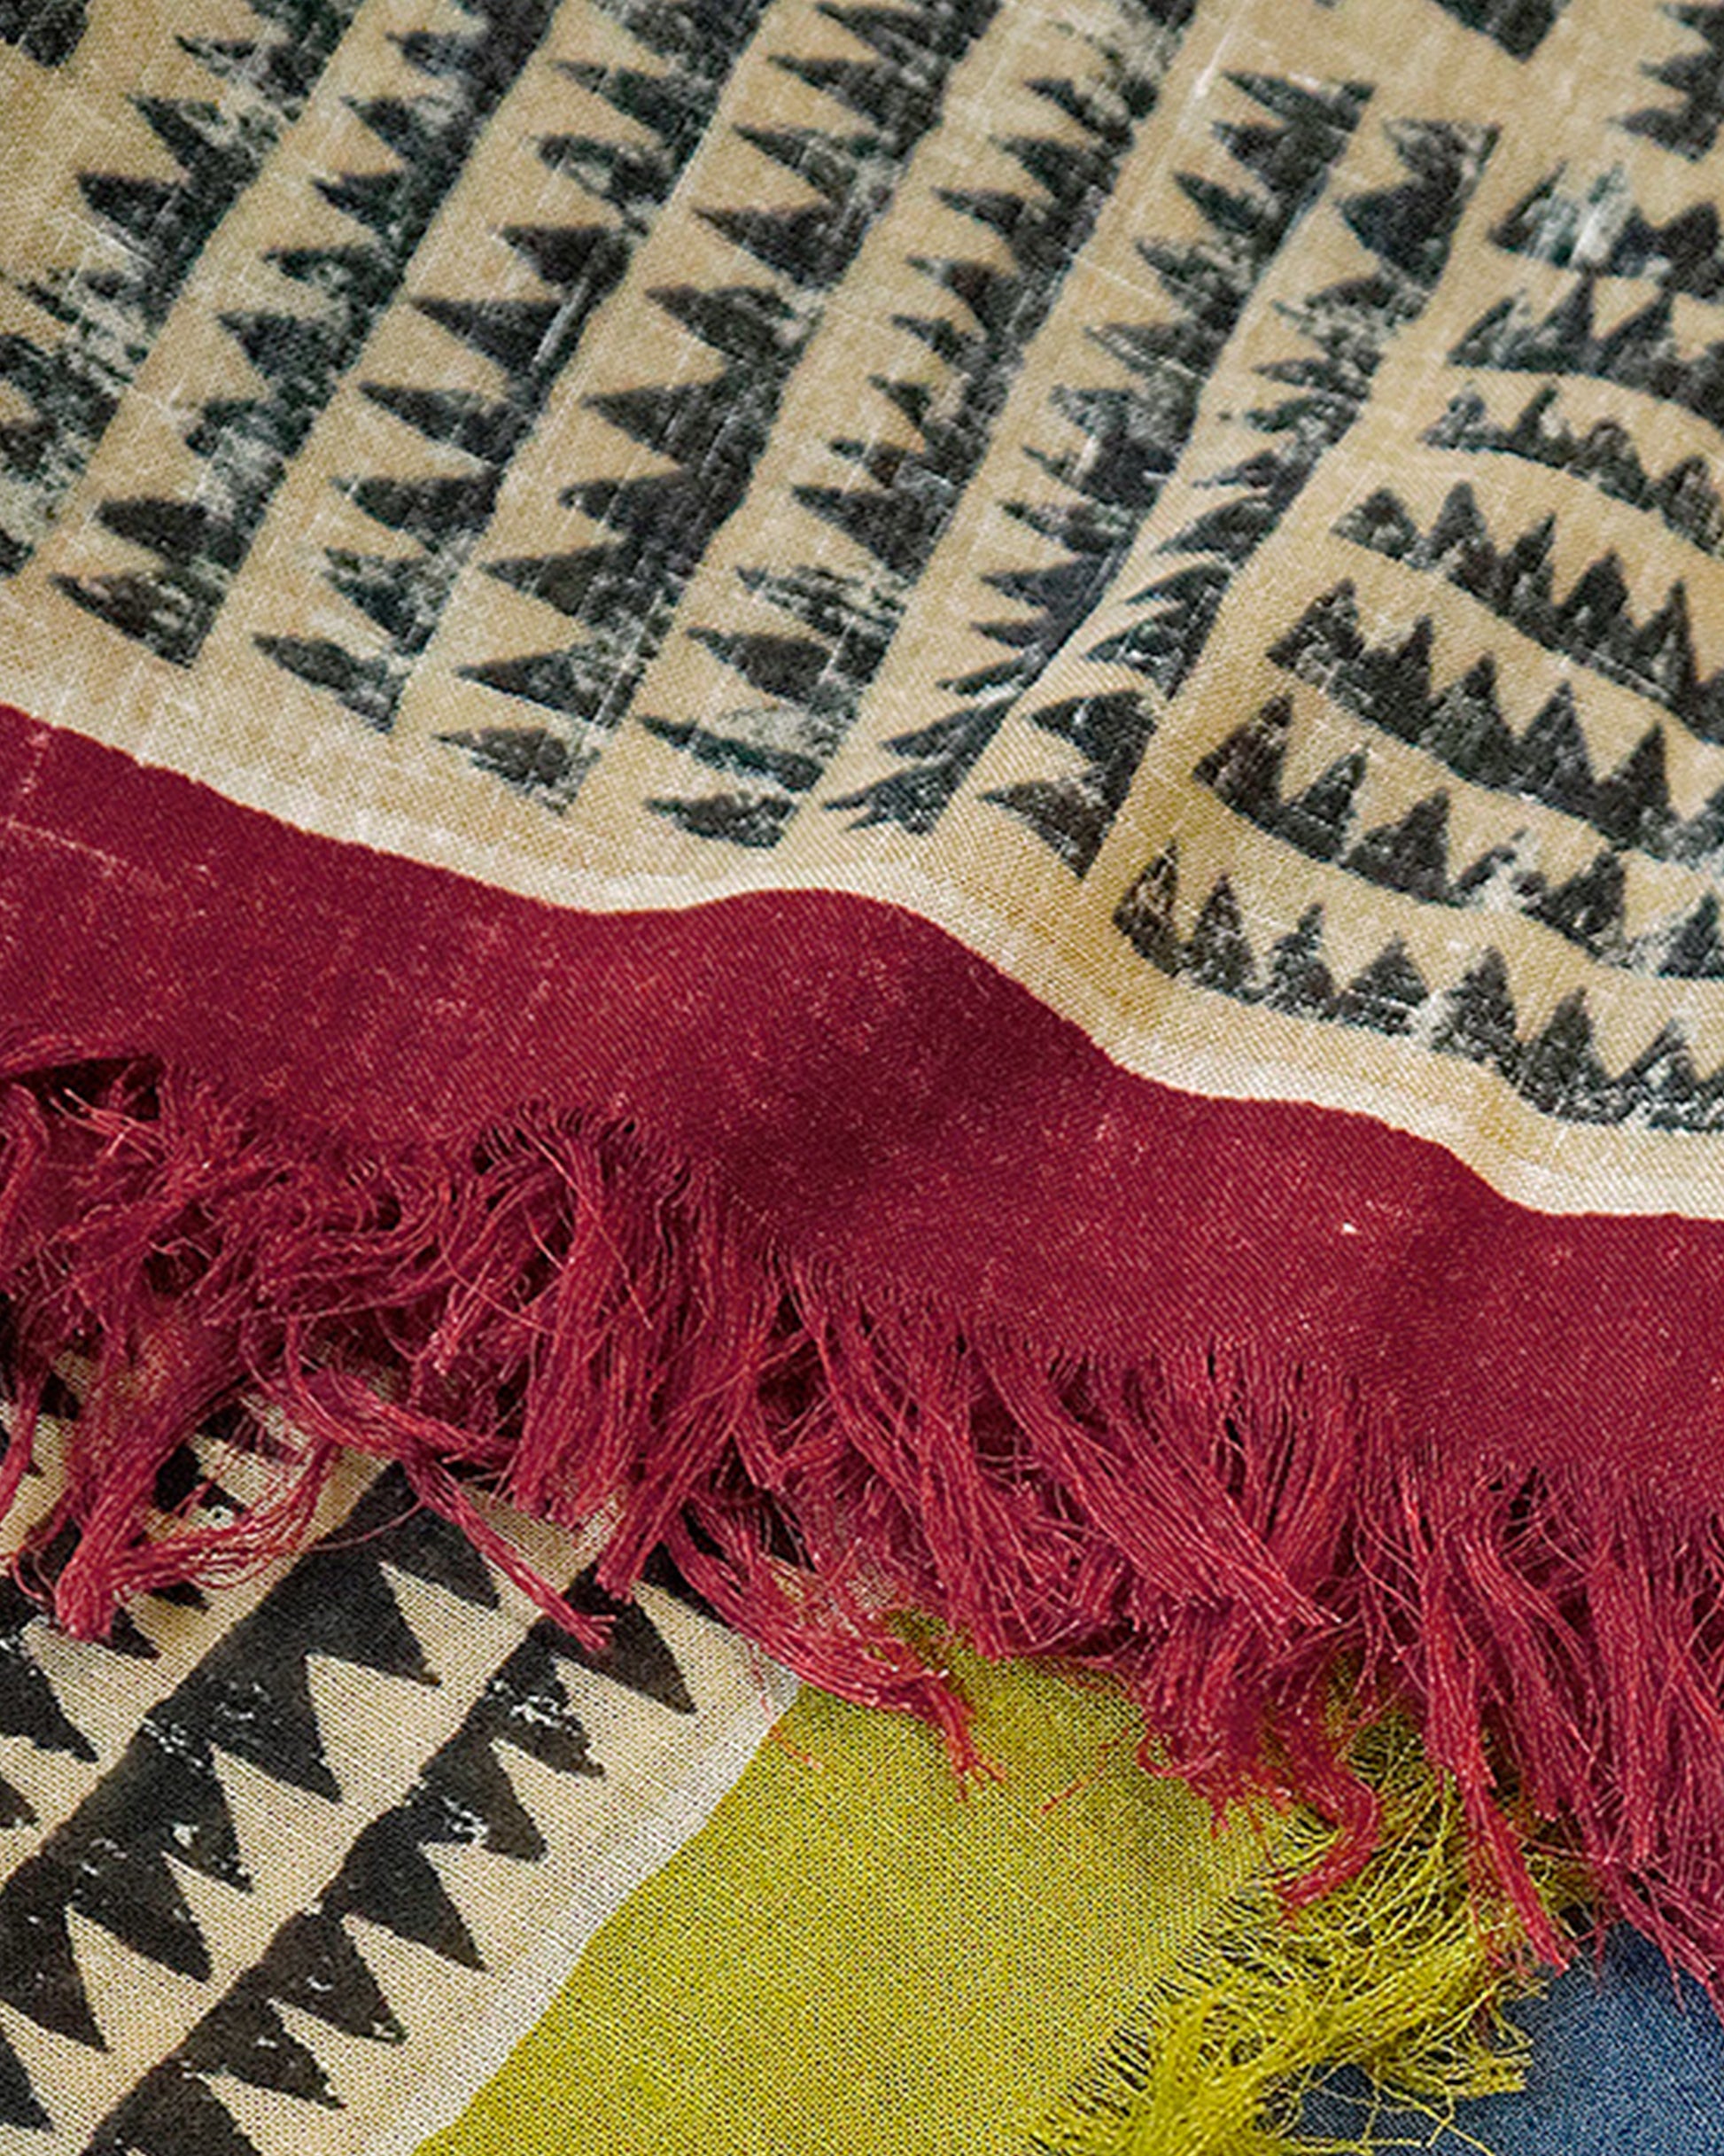 A large, fringy stole covered in a sawtooth block pattern with cranberry red edges.​